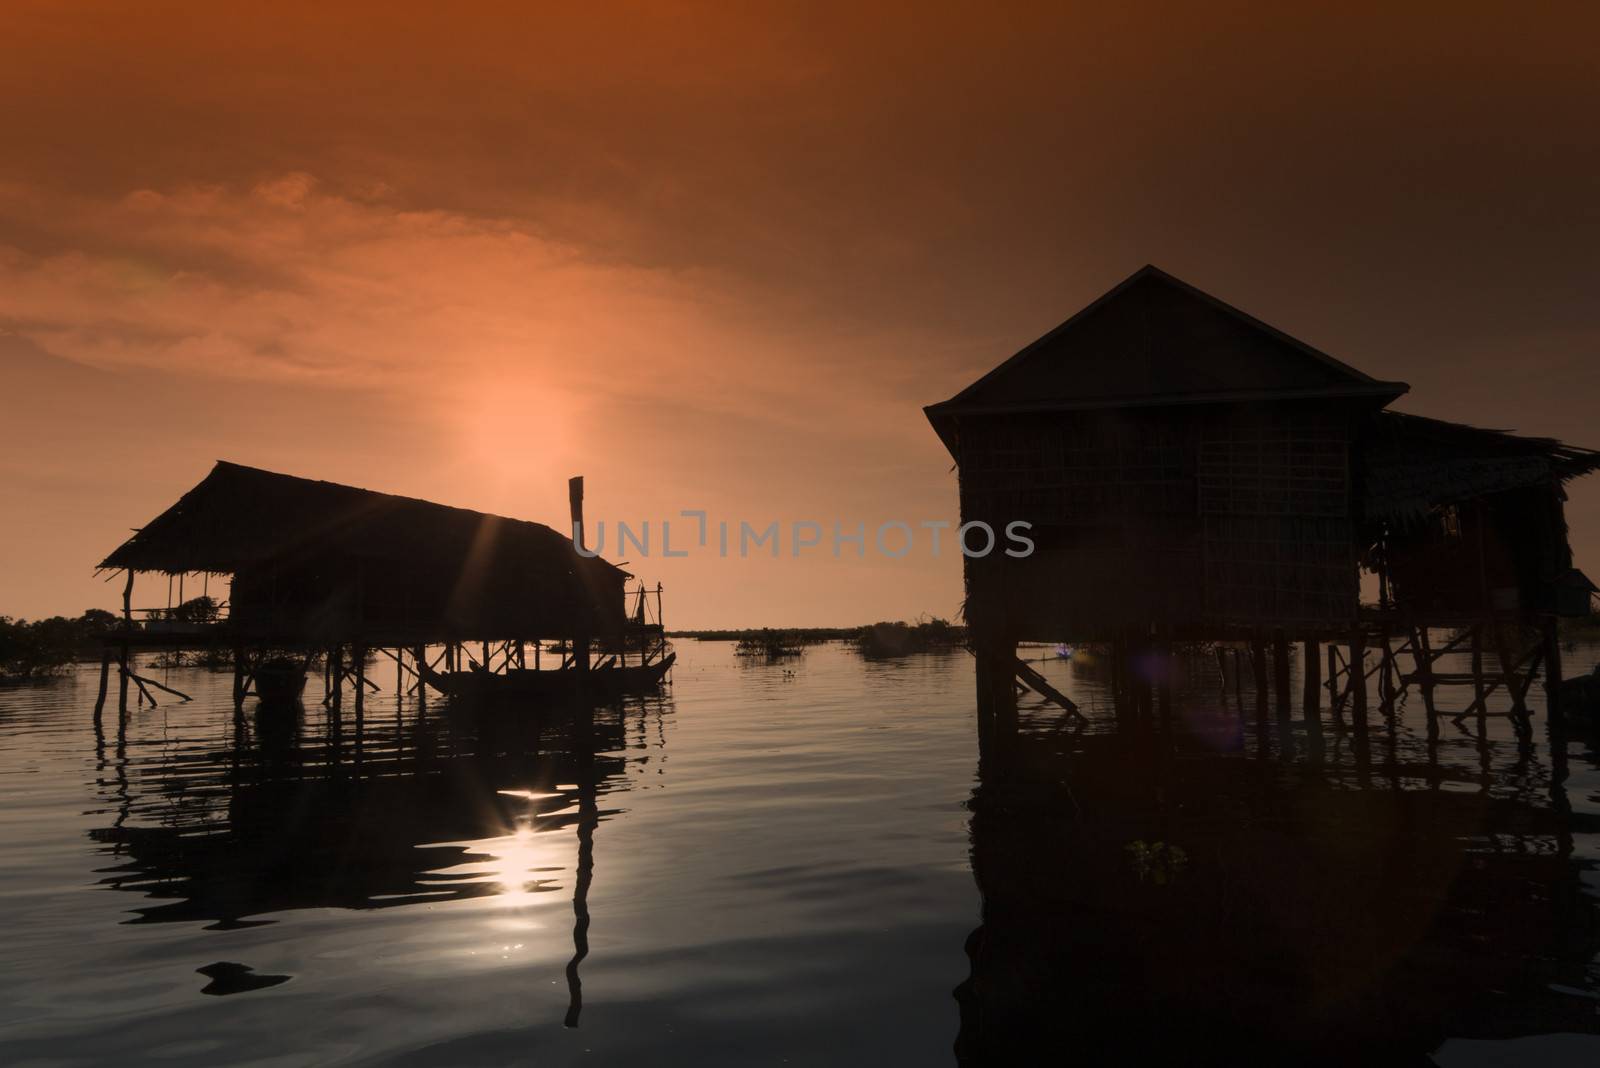 slilt houses in the evening at tonle sap lake in Cambodia